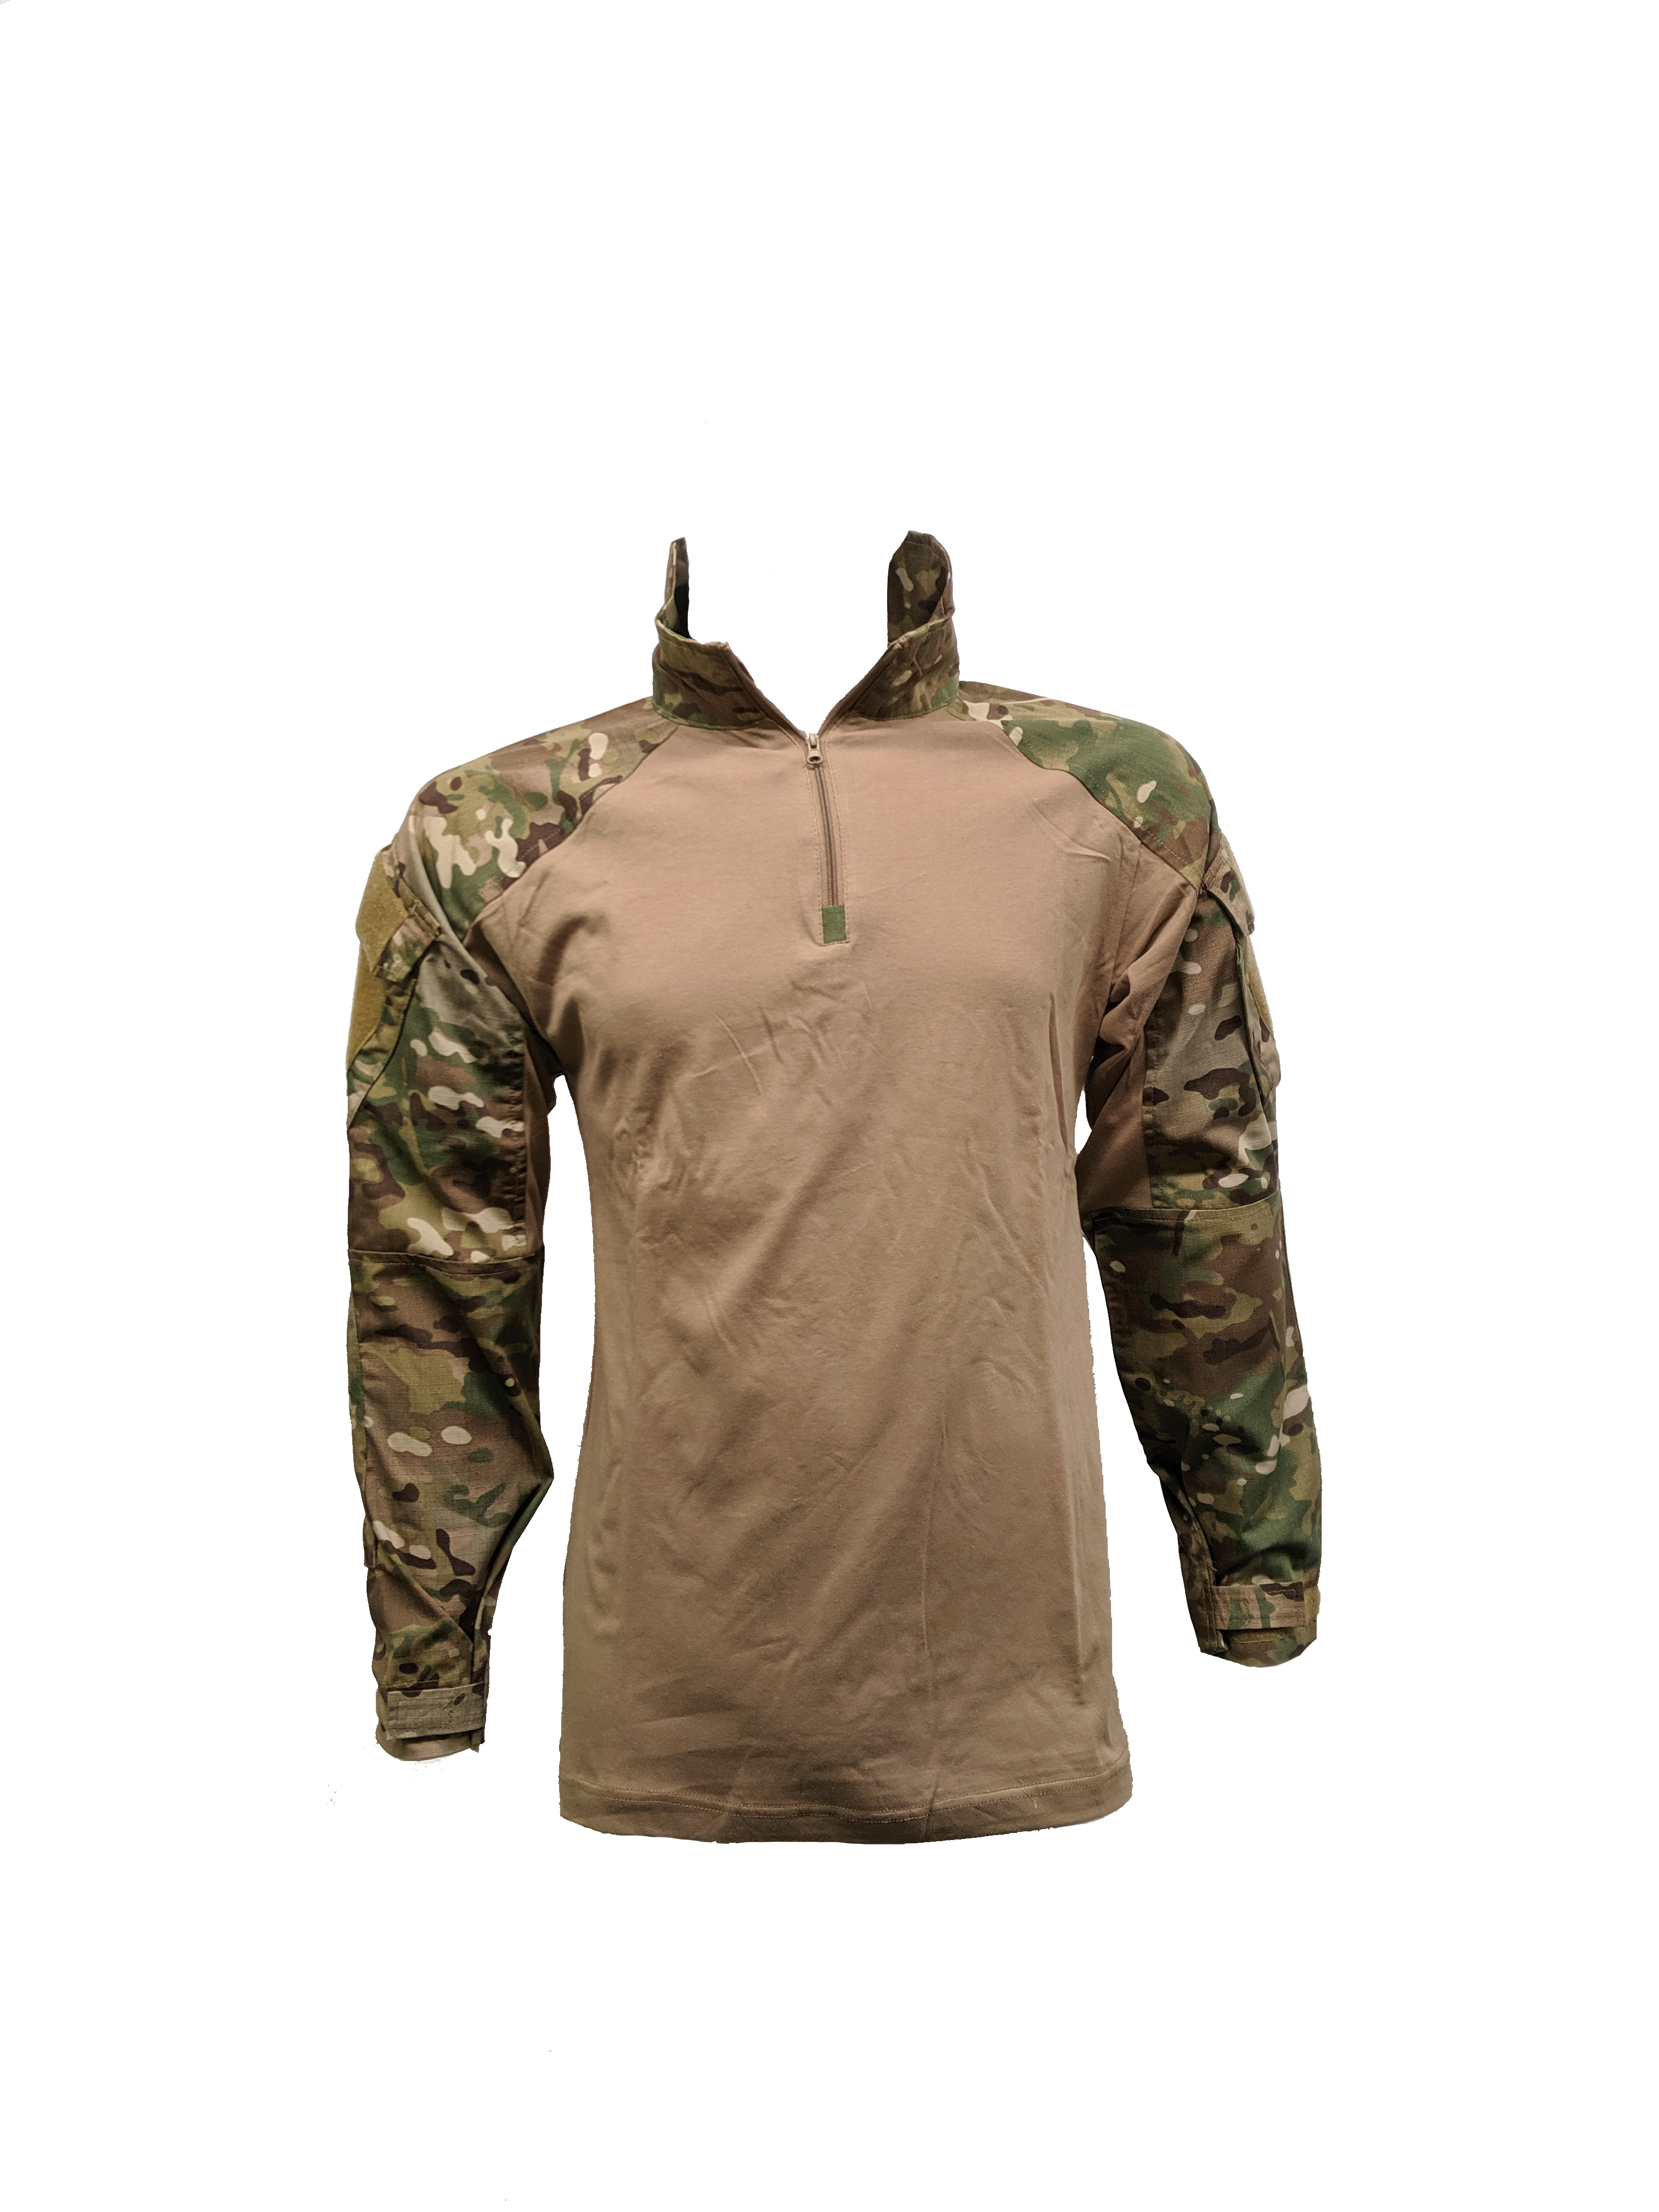 Tactical sweater SGS Universal camo